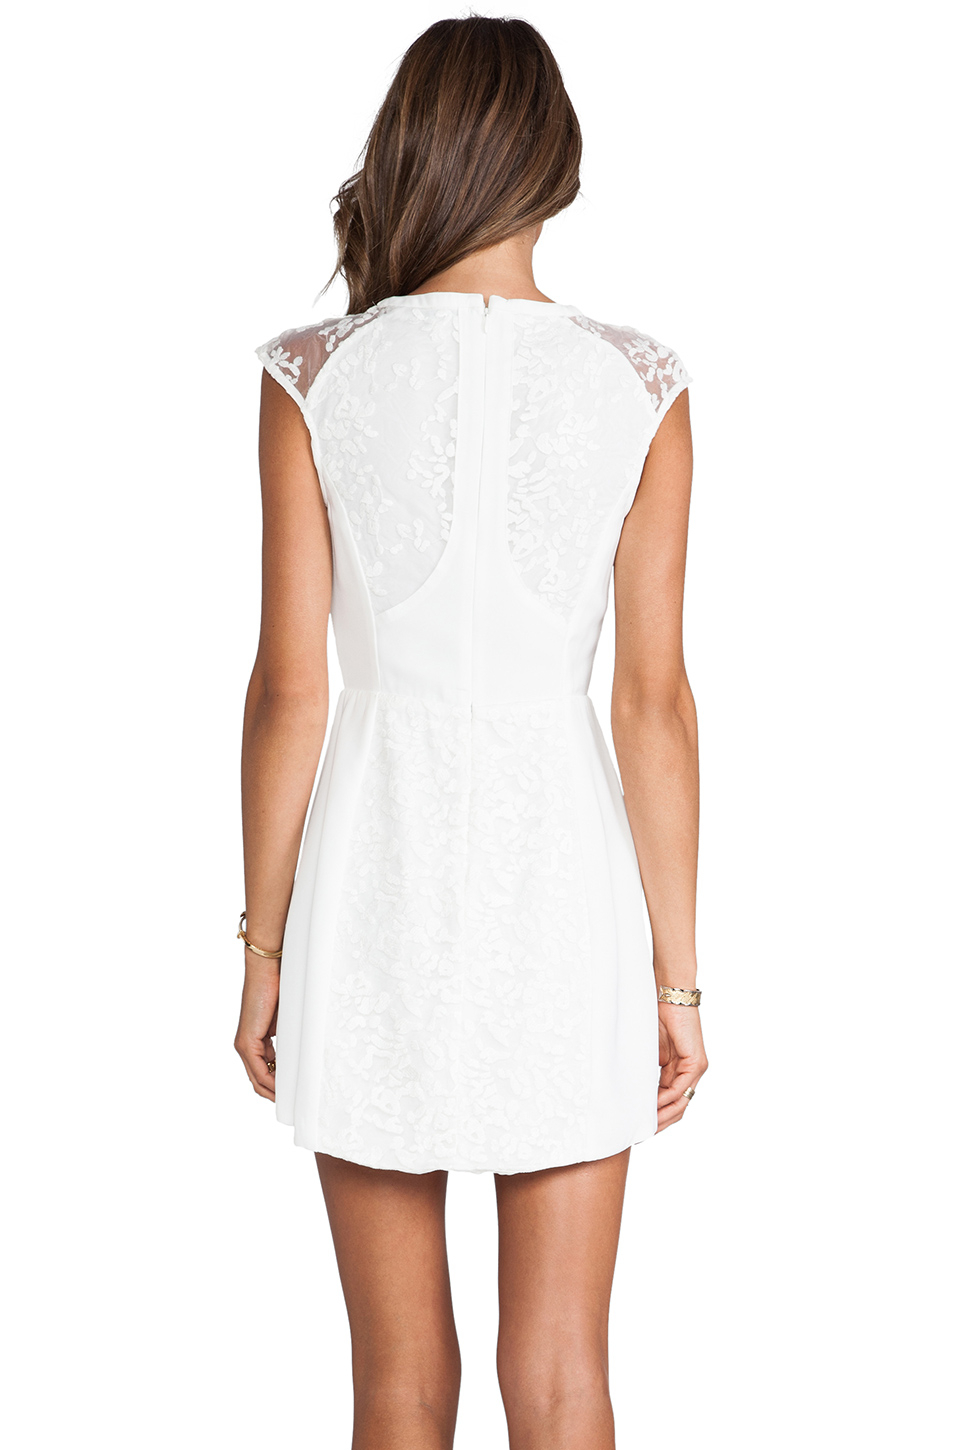 Lyst - Cameo Into The Flame Dress in Ivory in White